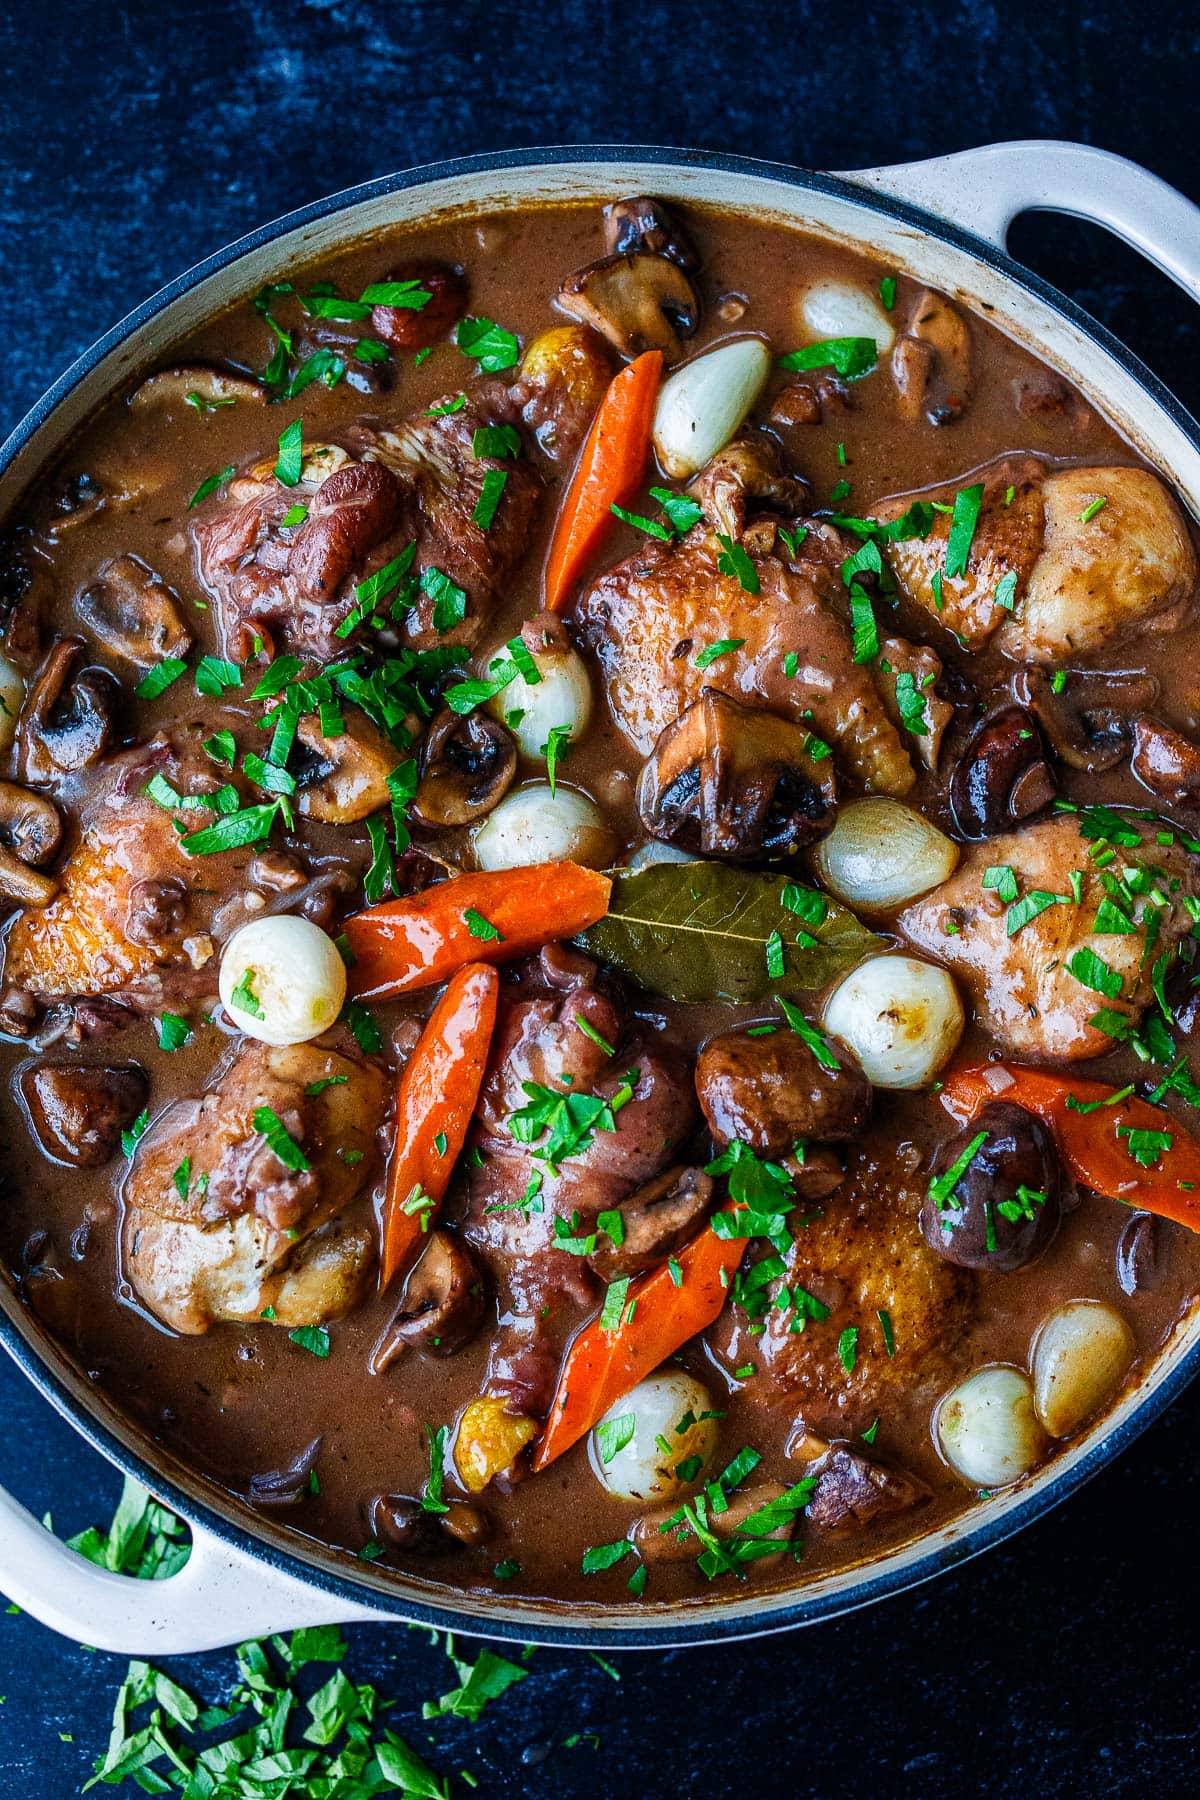 coq au vin in dutch oven with seared chicken thighs and drumsticks, carrots, pearl onions, mushrooms, garnished with fresh parsley.